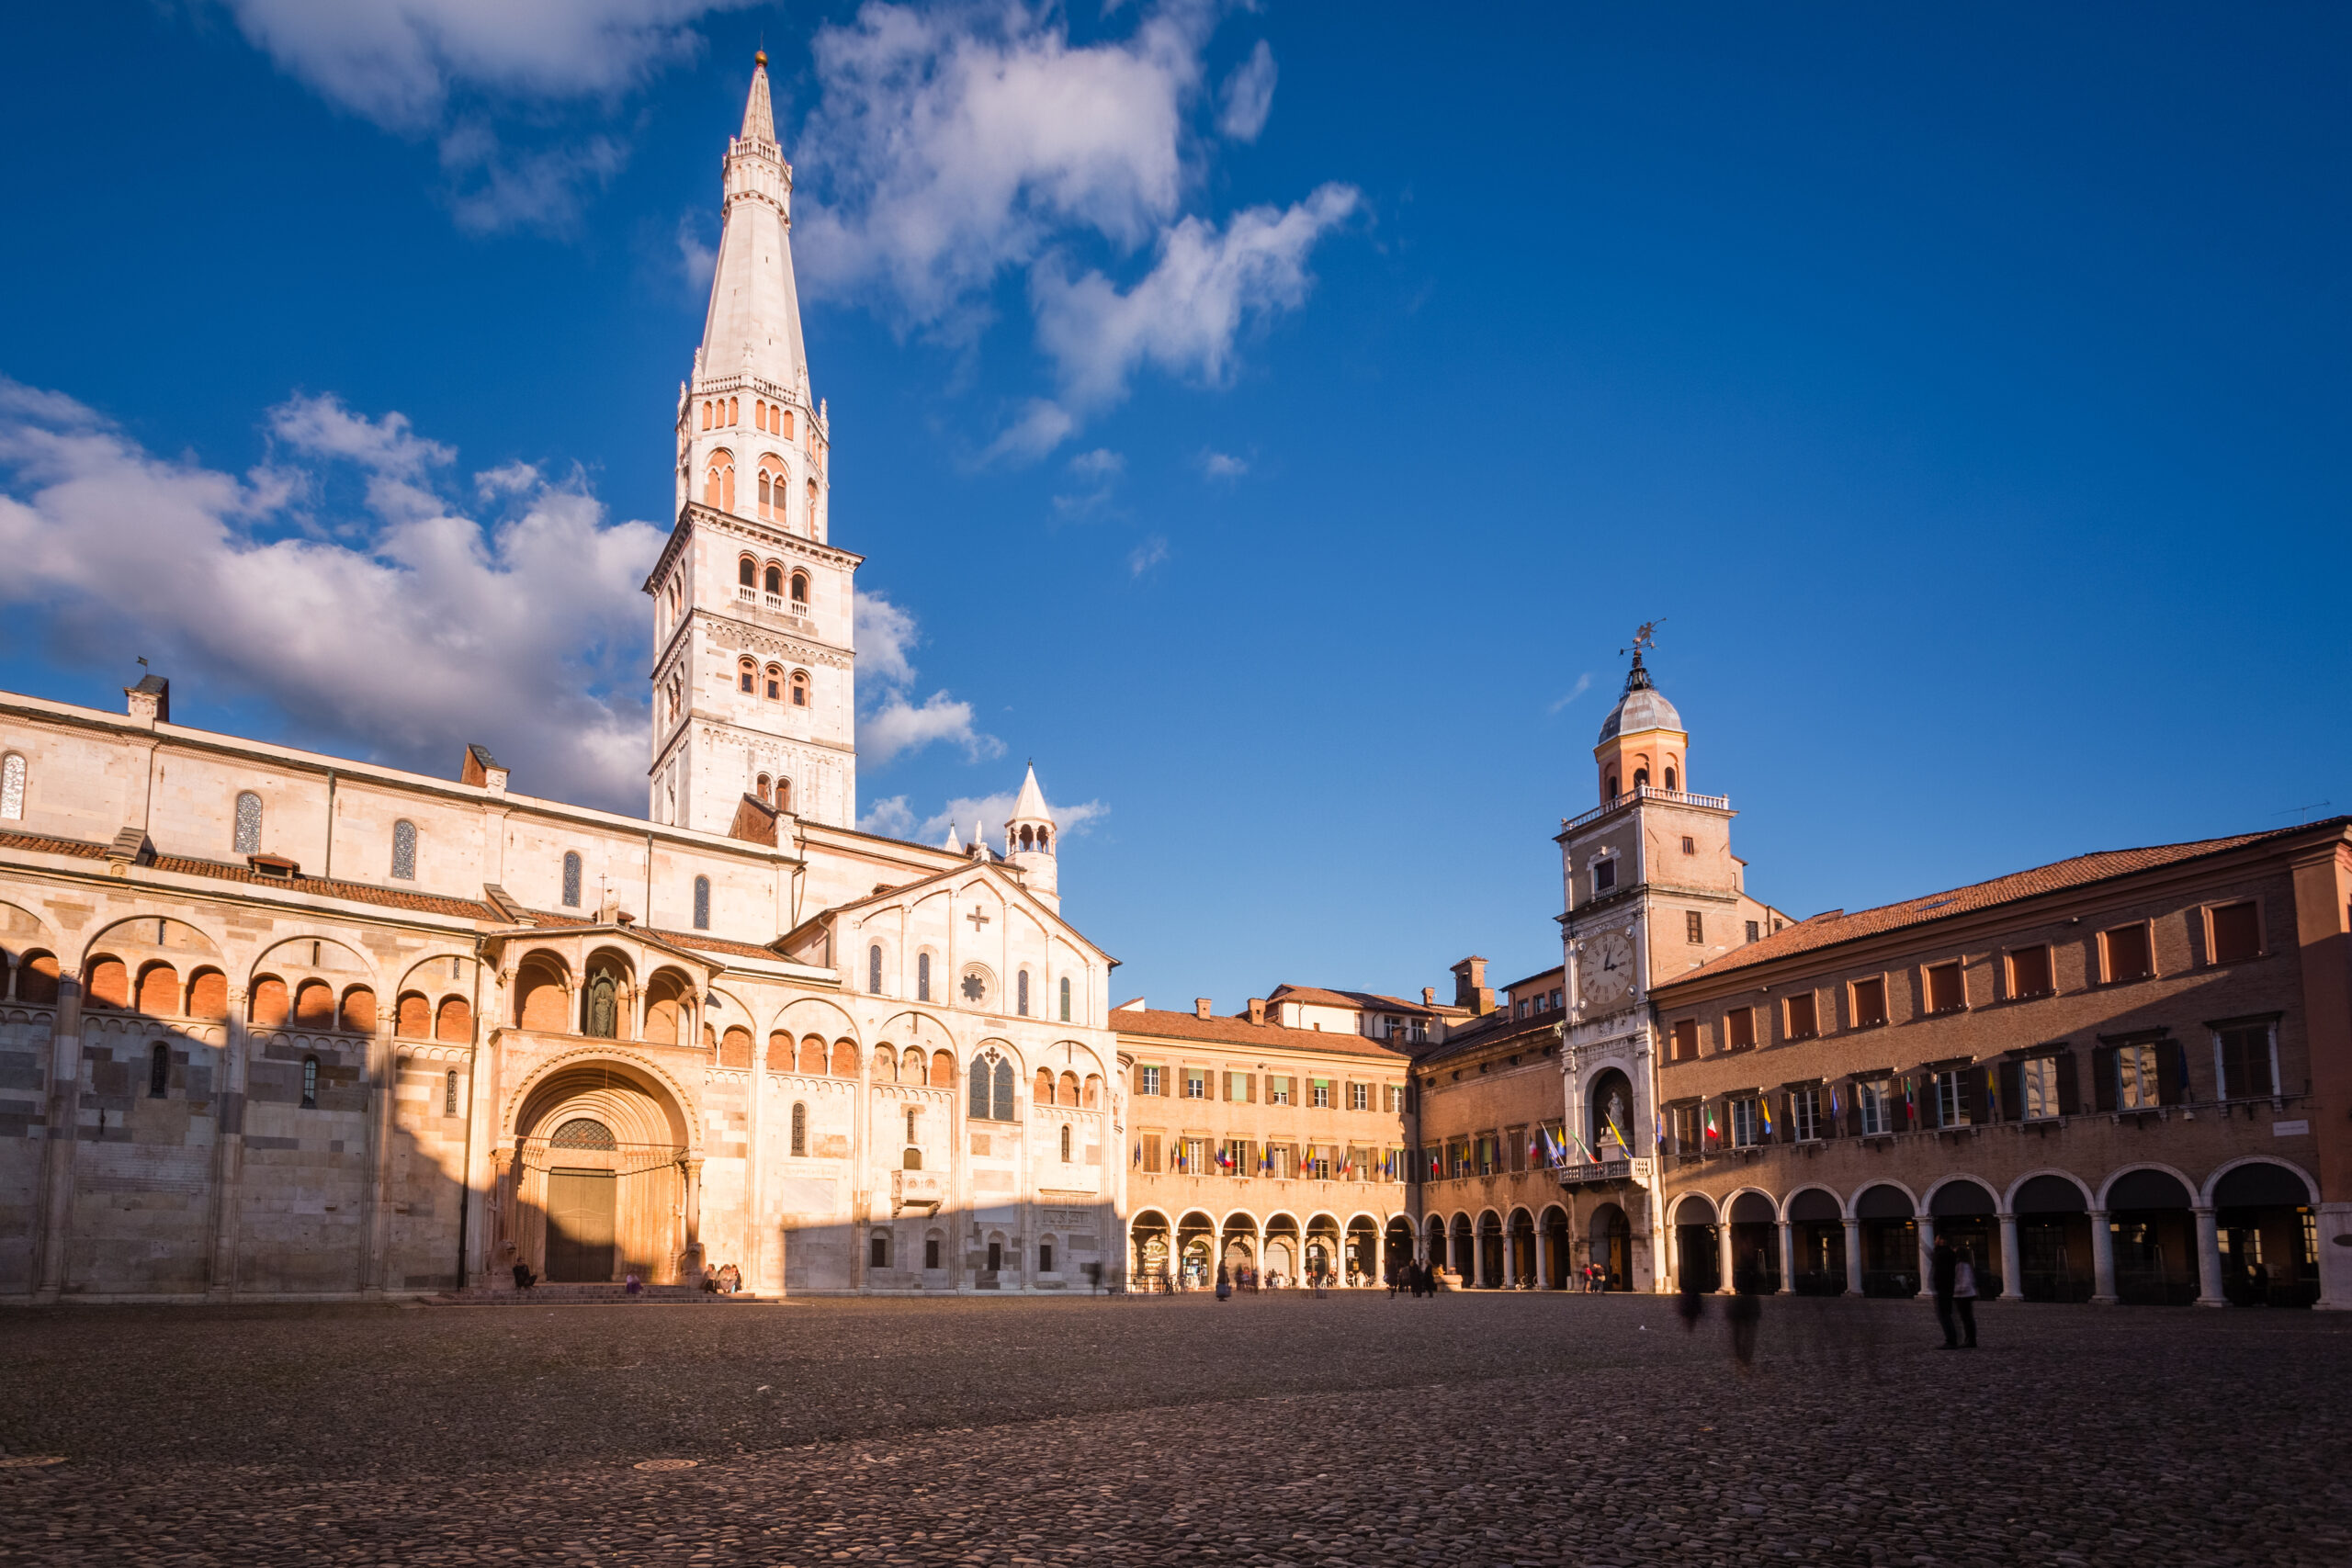 Modena, Emilia Romagna, Italy. Piazza Grande and Duomo Cathedral at sunset.